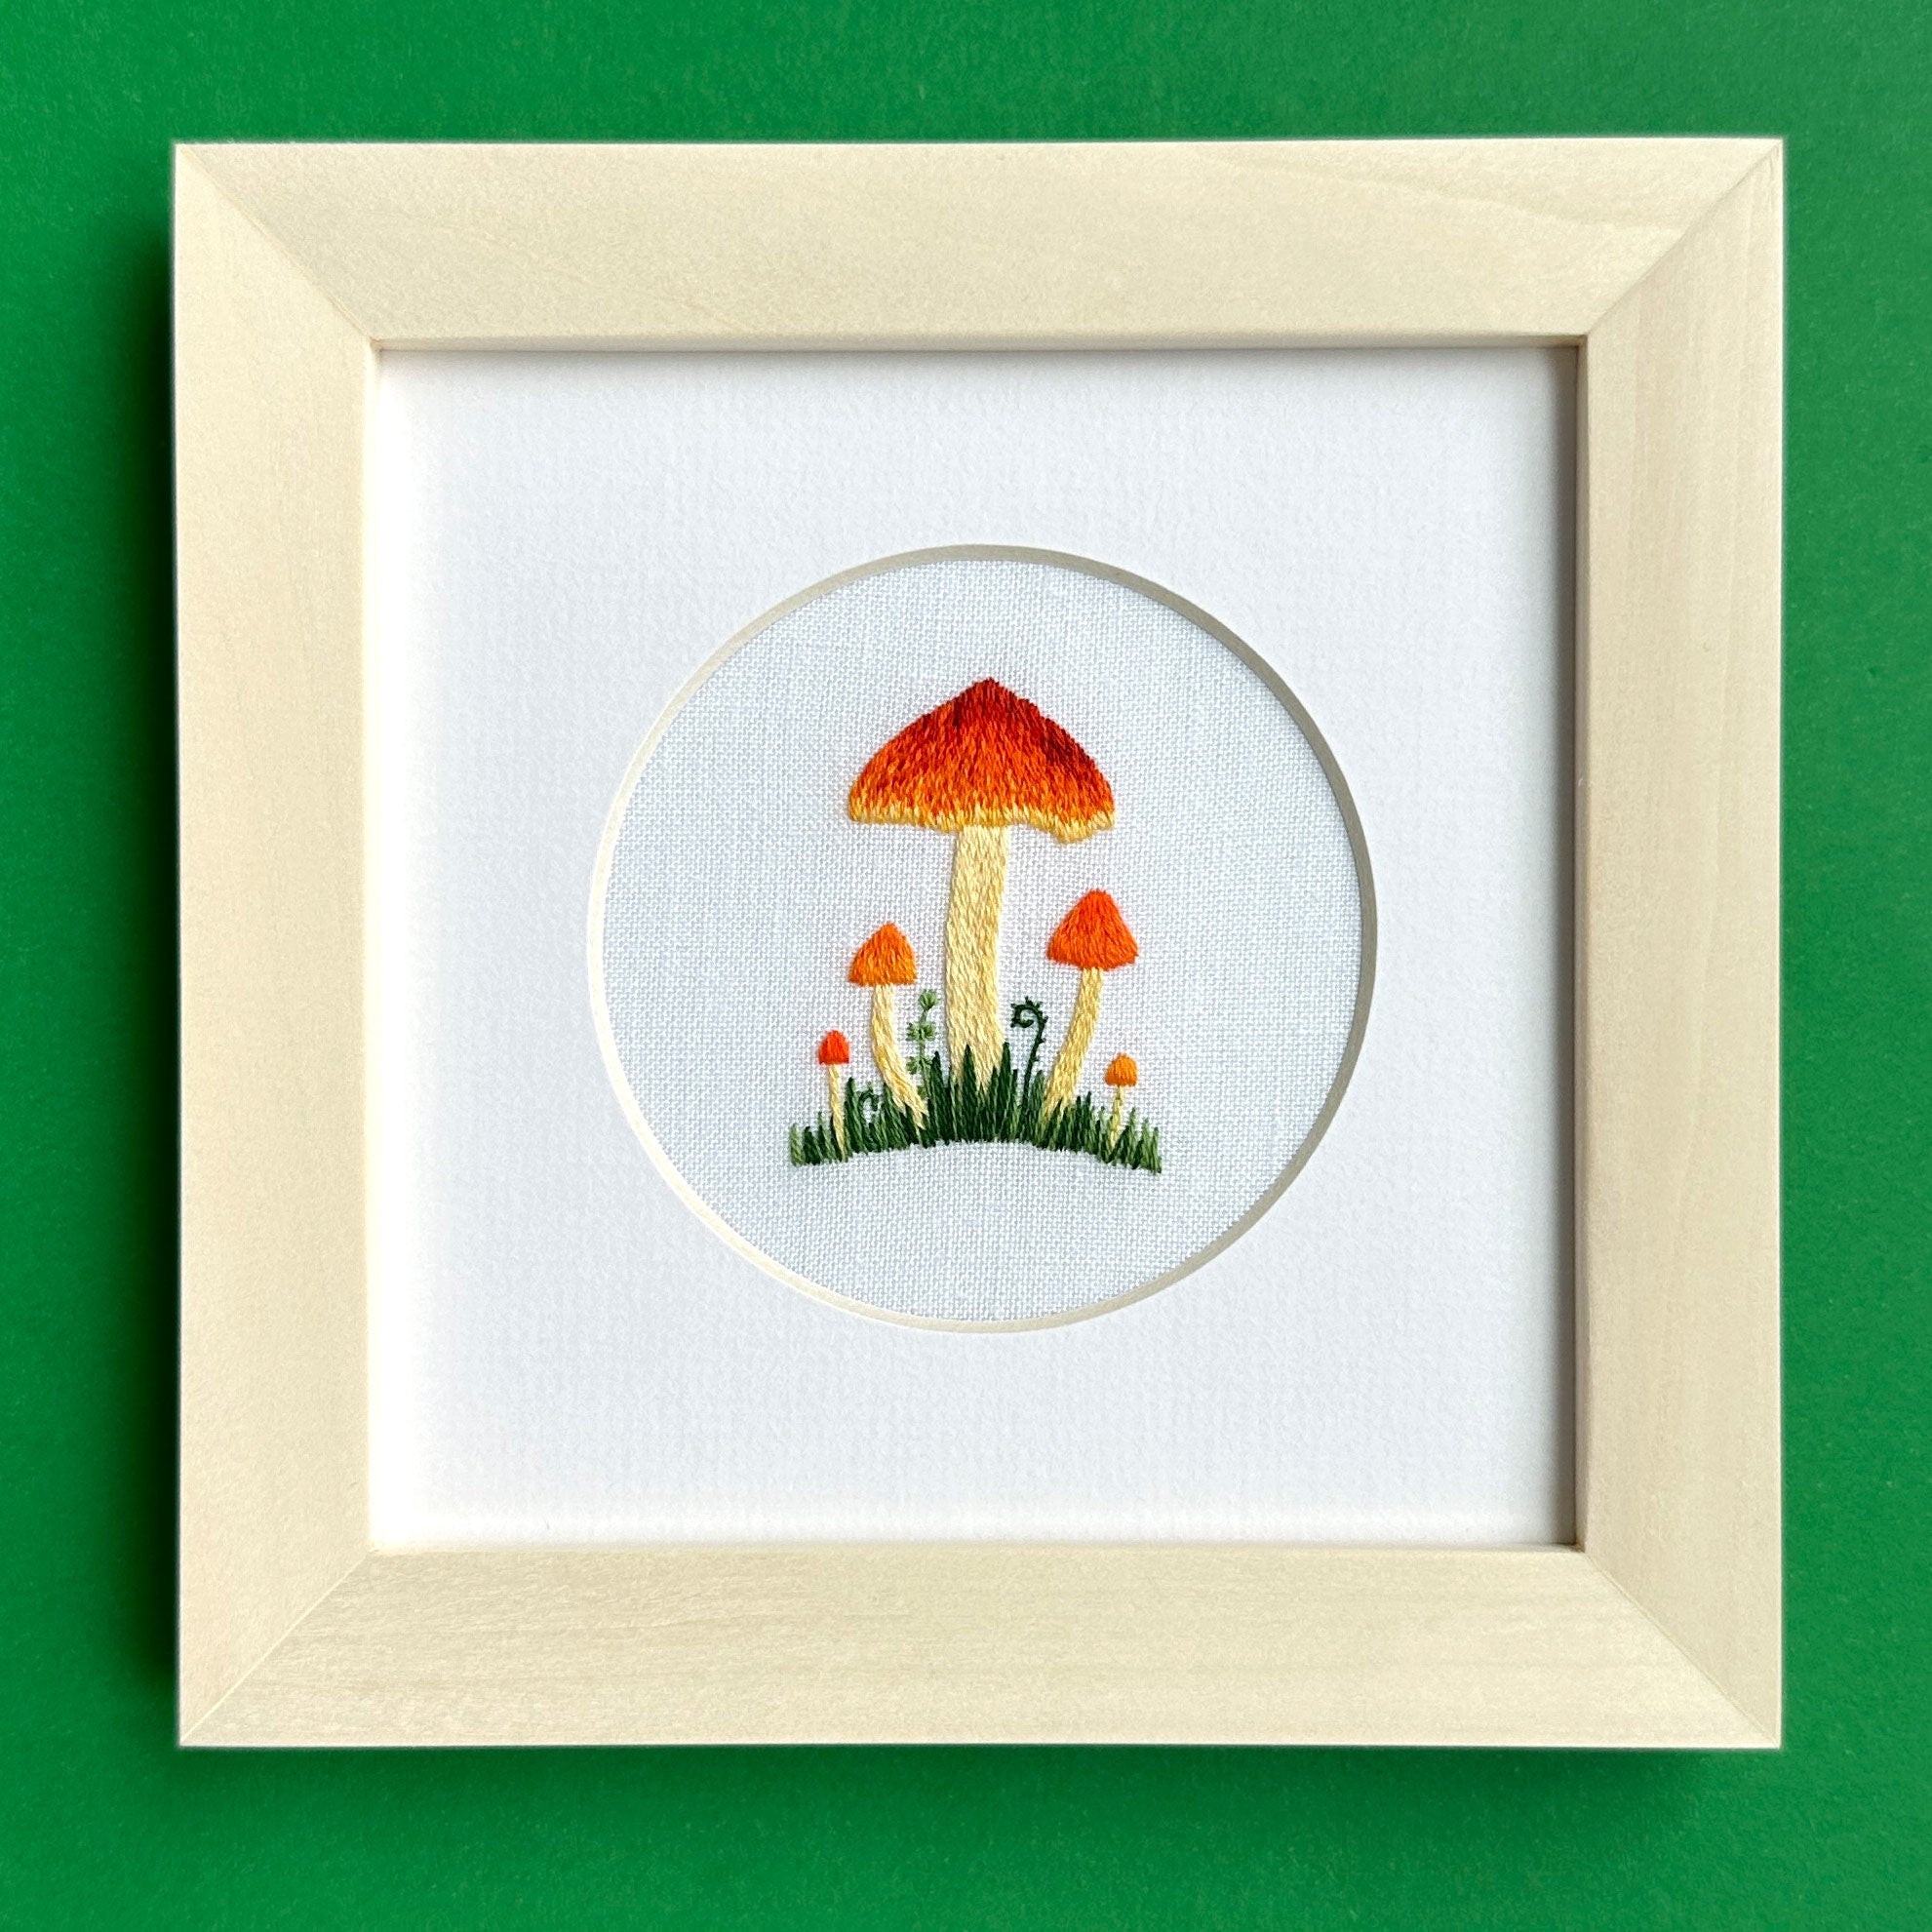 Witch's Hat Mushroom on White Linen Hand Embroidered Art